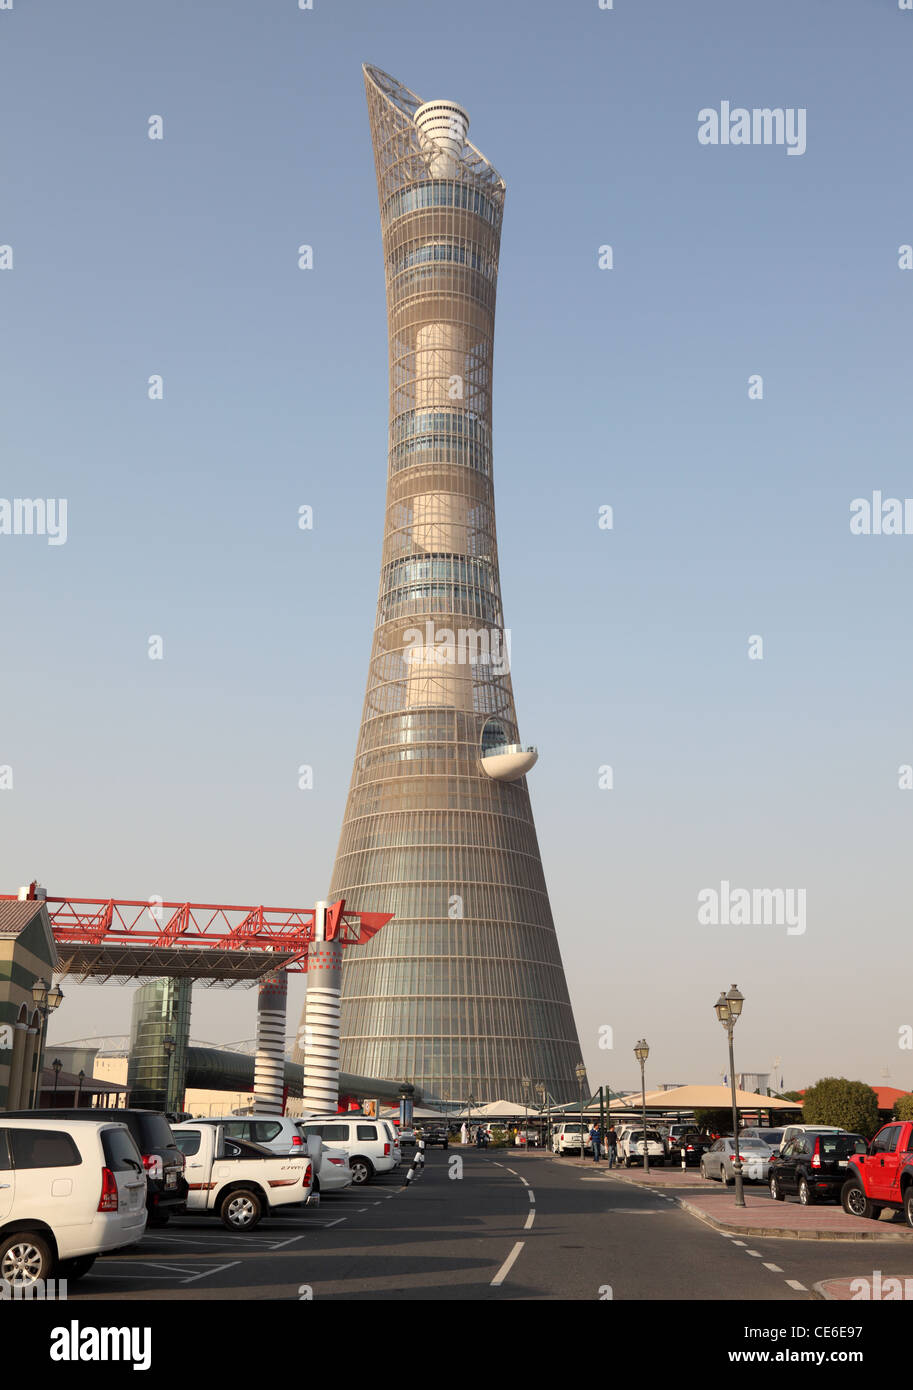 The Aspire Tower in Doha Sports City Complex, Qatar Stock Photo